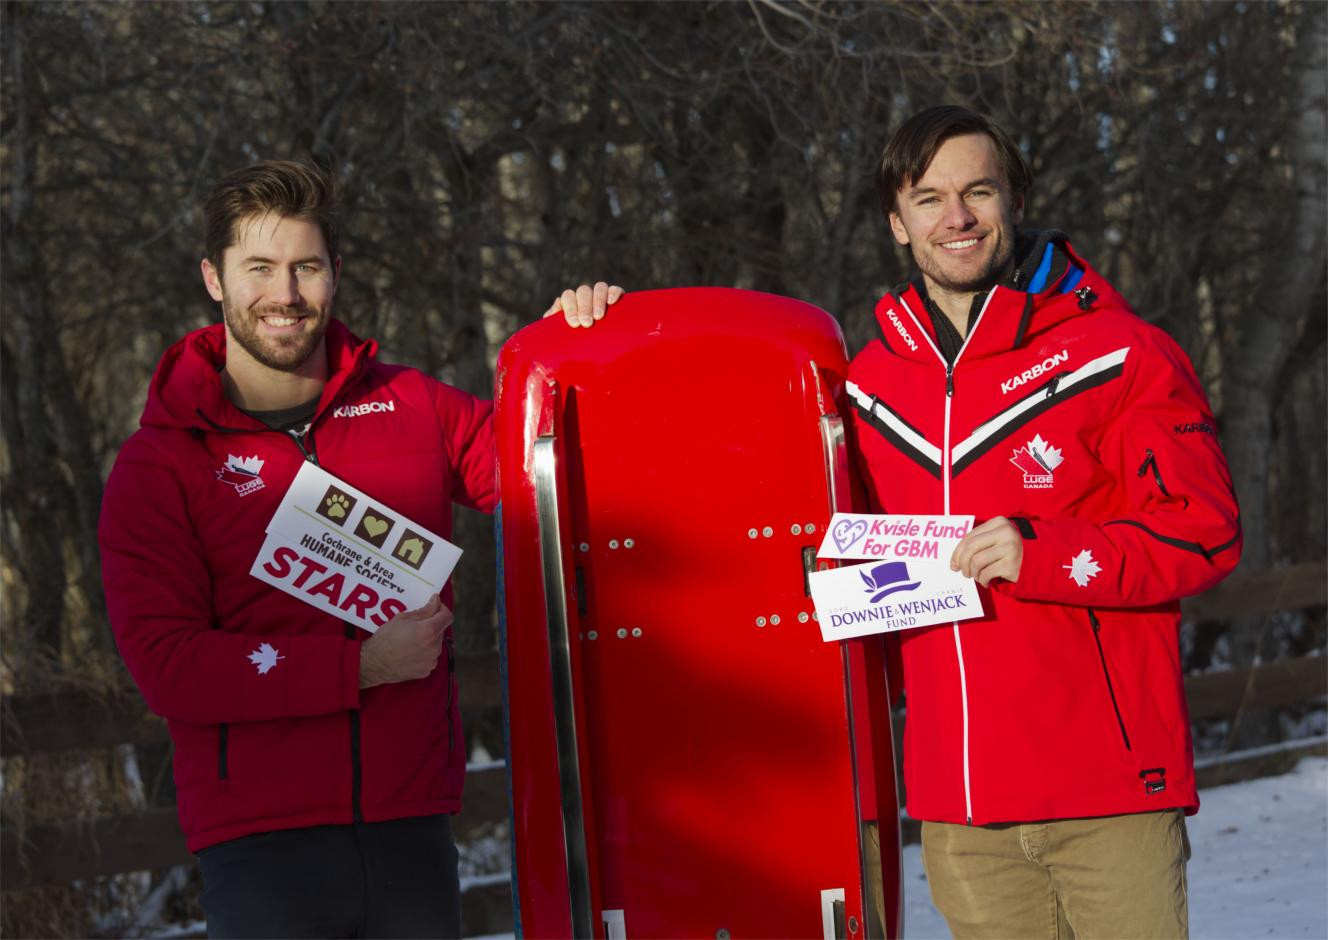 Olympic luge medallists to race with charities on their sled